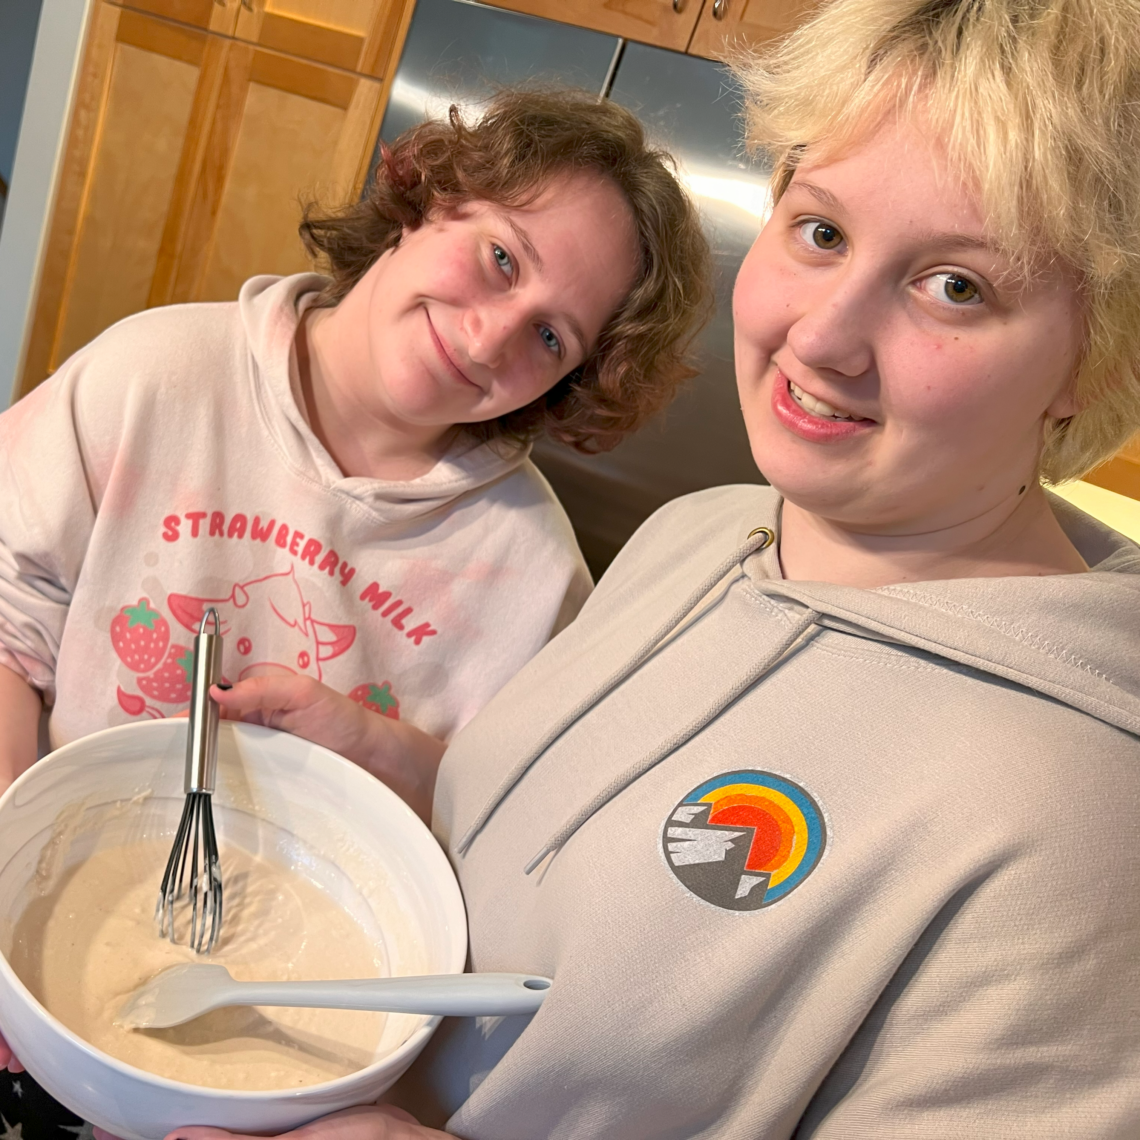 Rex and Kira in tje kitchen, holding a bowl of pancake batter.